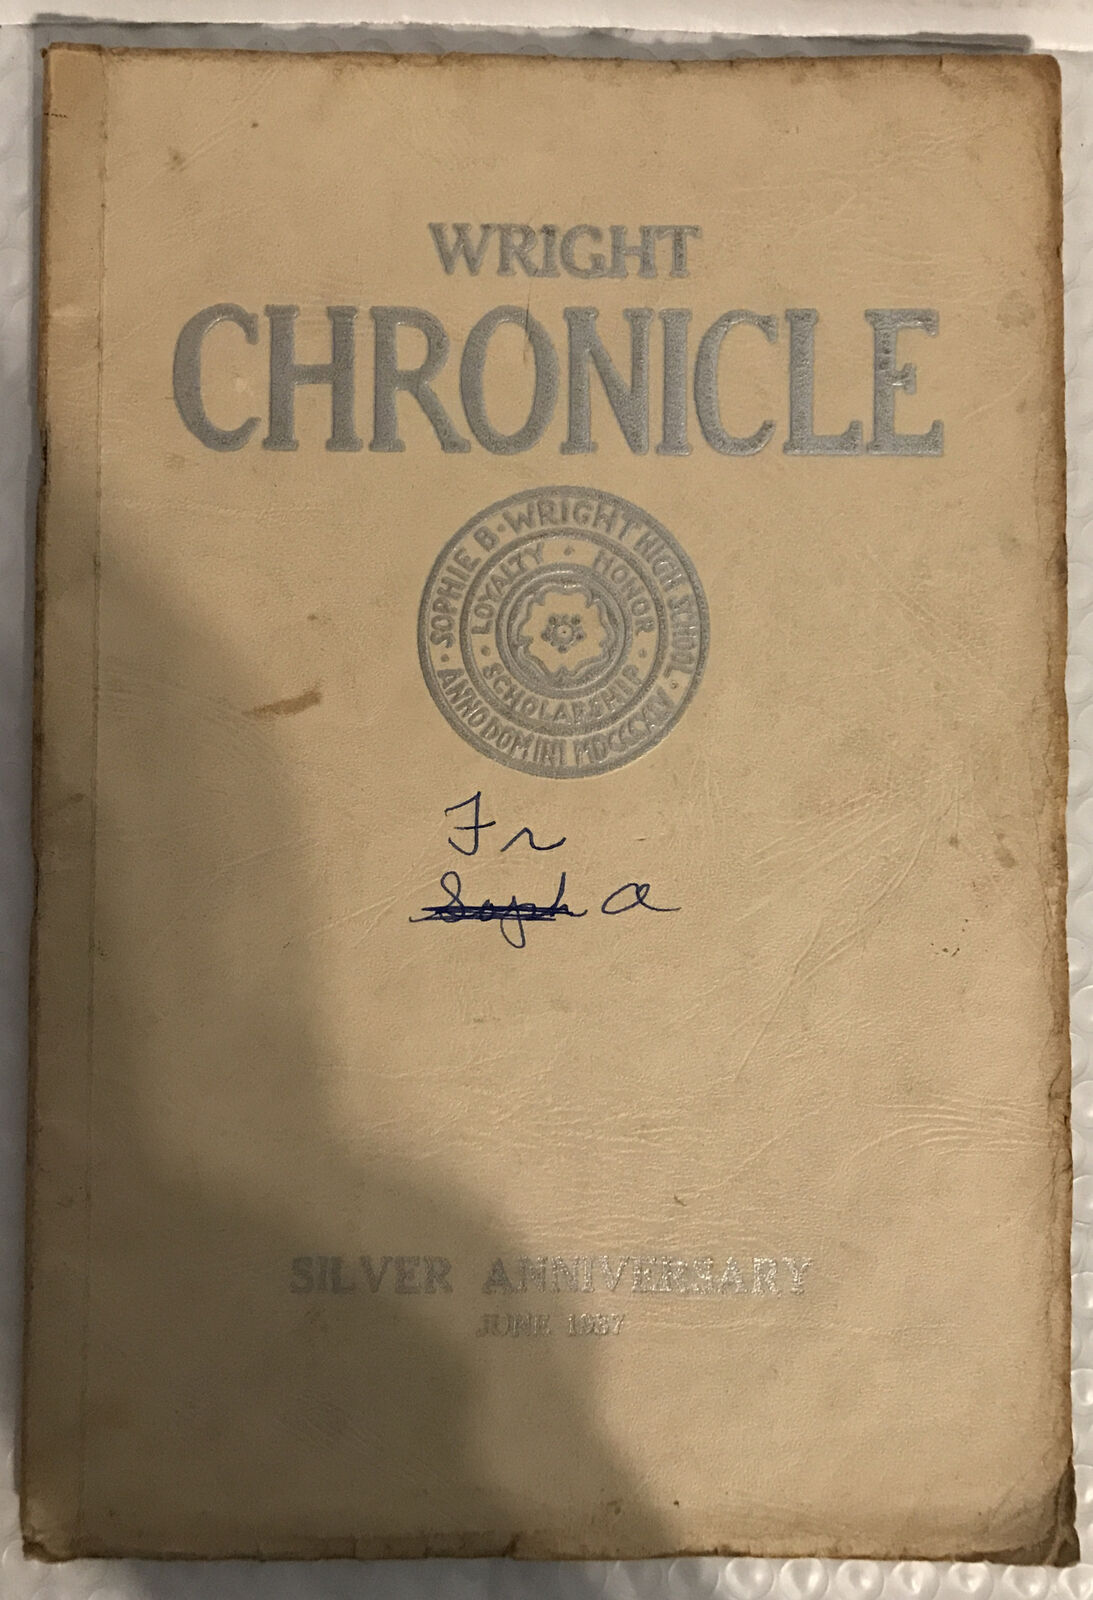 Wright Chronicle-By Students of Sophie B. Wright H.S.-New Orleans,La June 1937